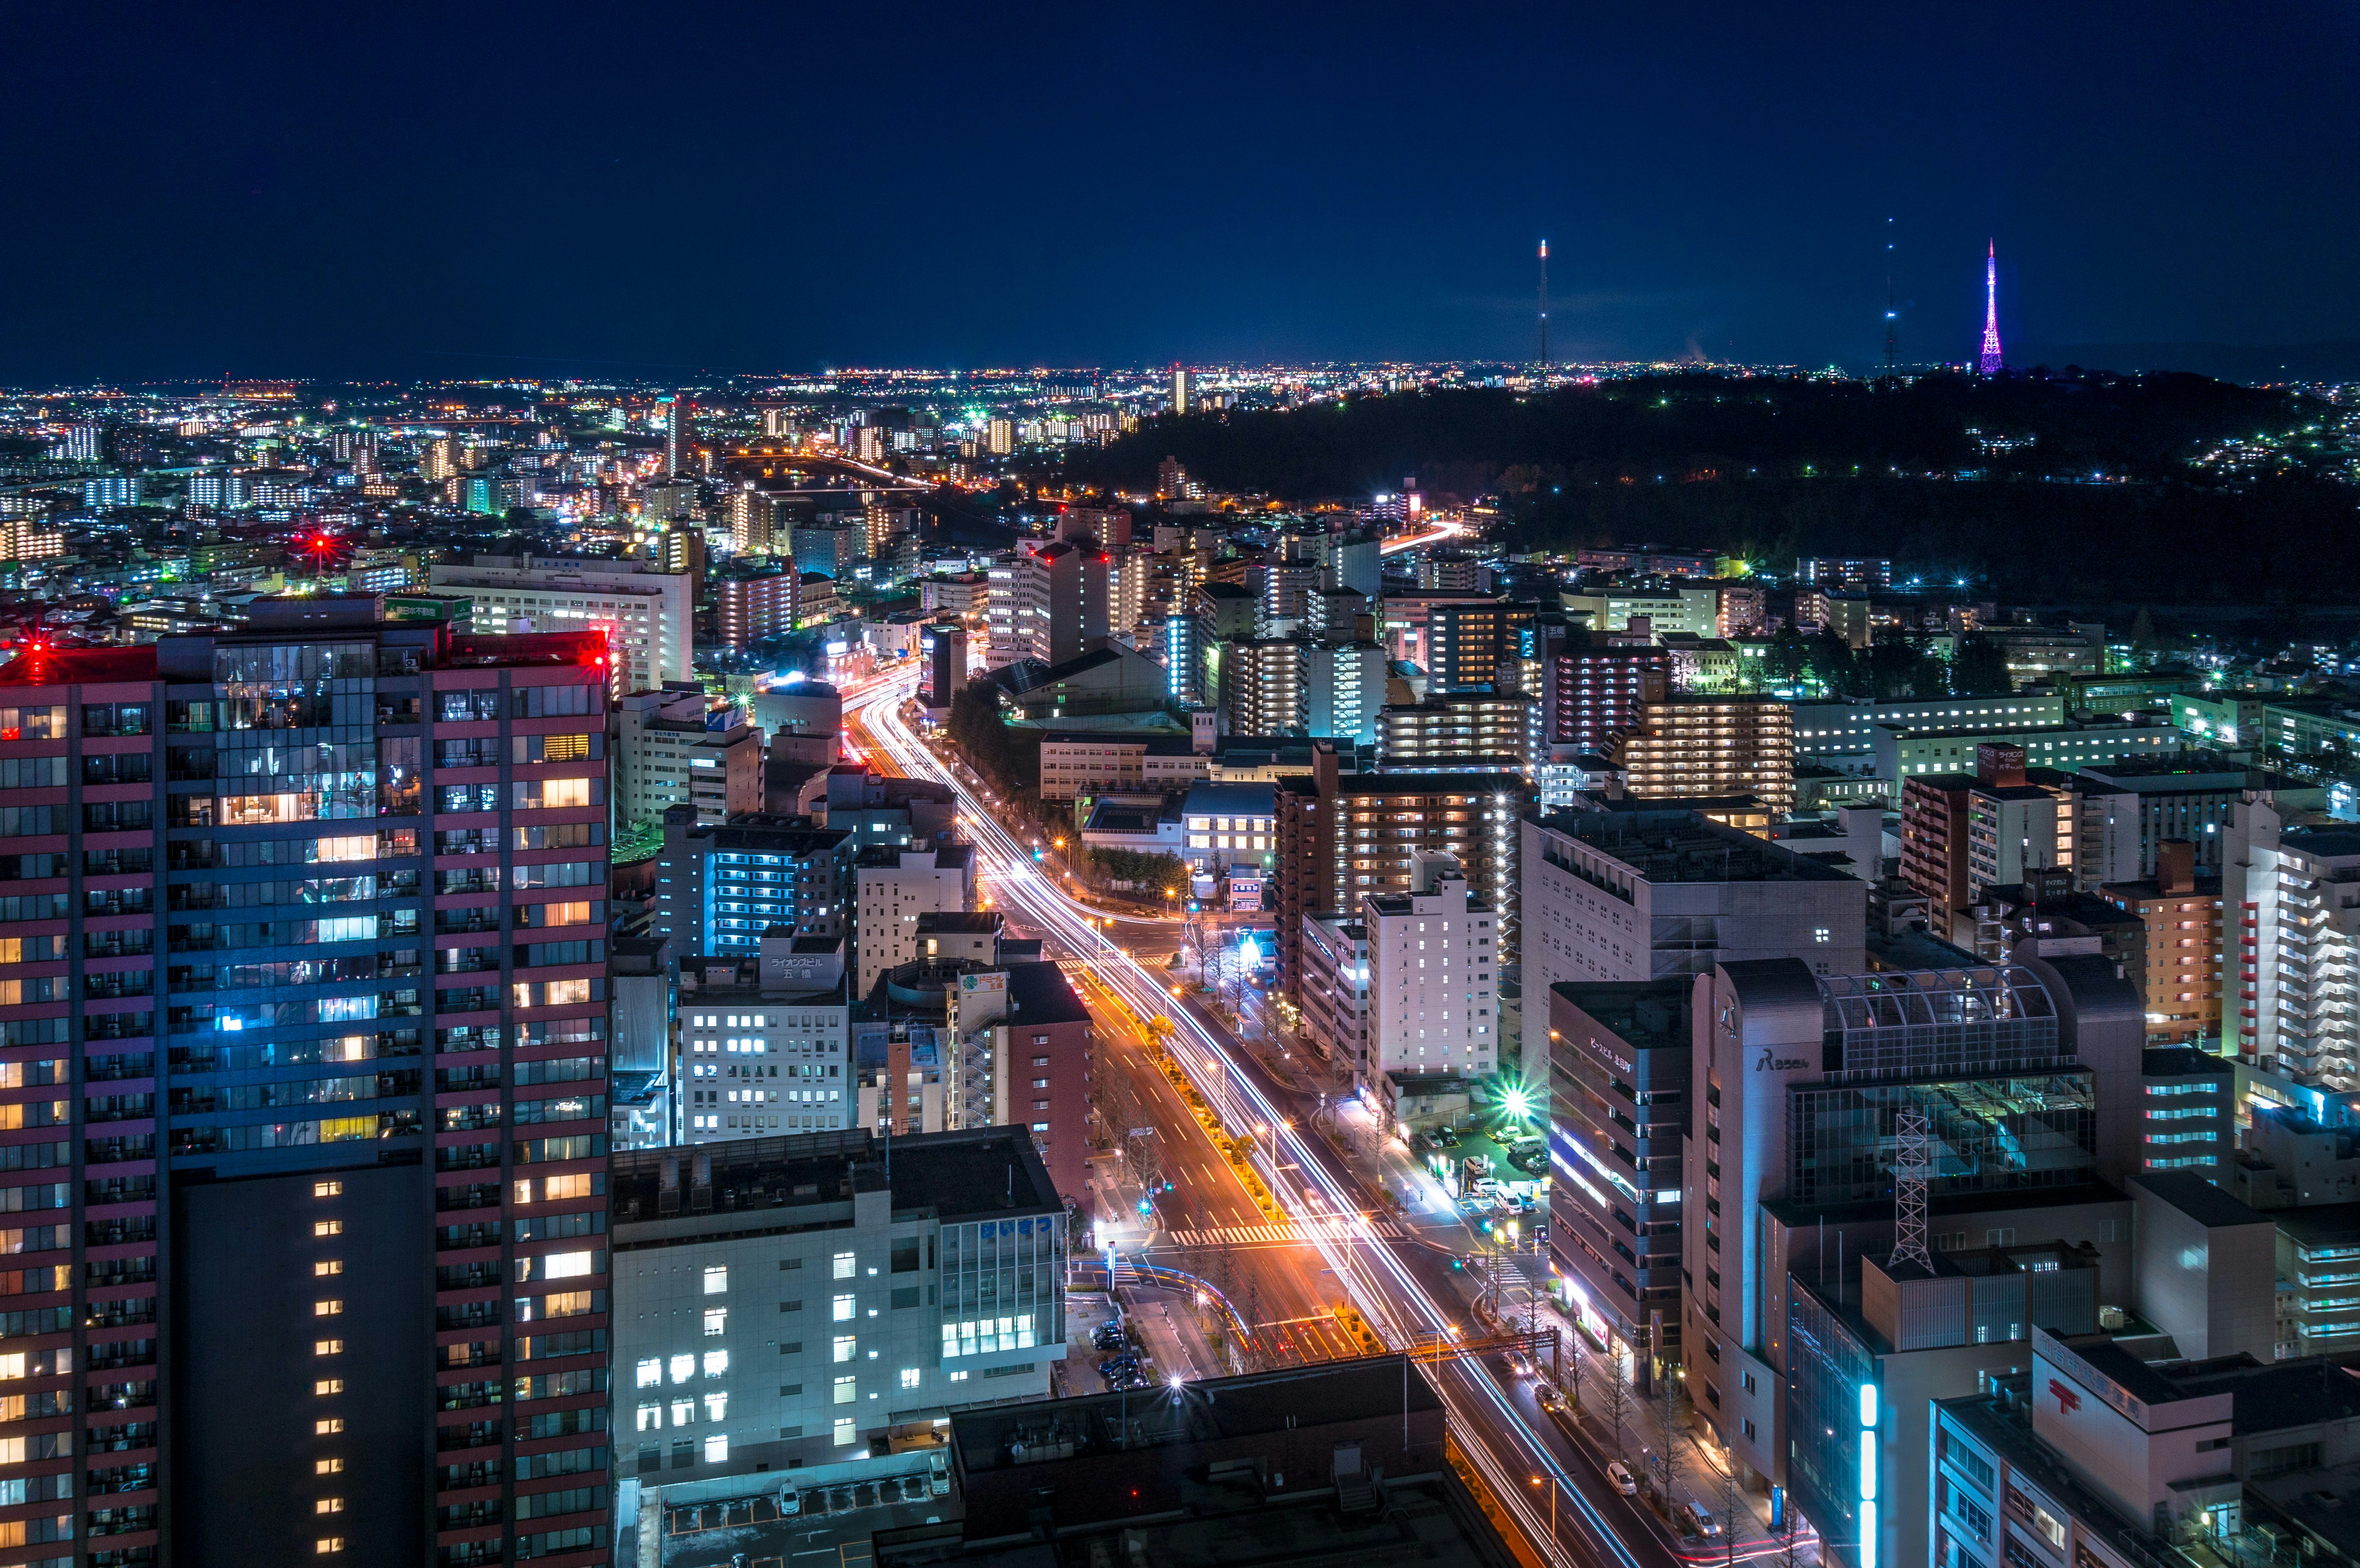 An aerial view of the city of Sendai at night, with the streetlights and interiors of tower blocks illuminating the large city.